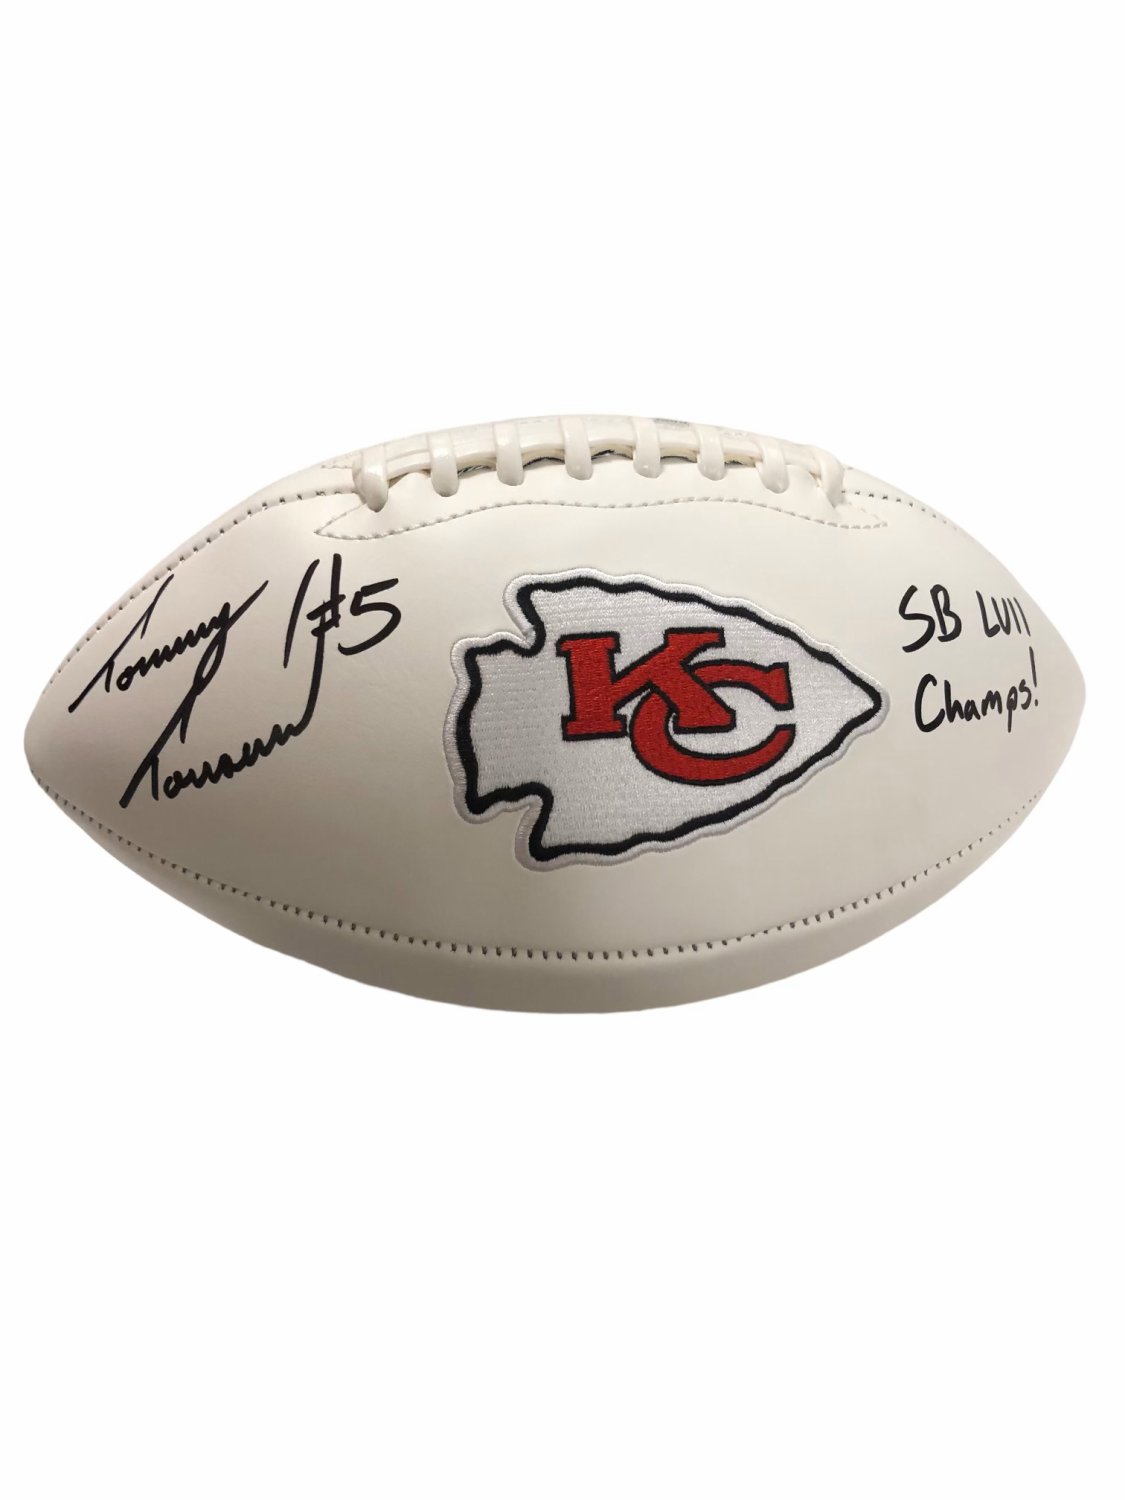 Tommy Townsend Kansas City Chiefs Authentic Autographed Signed White Panel  Super Bowl Commemorative Football with SB LVII Champs! Inscription - JSA  Authentic